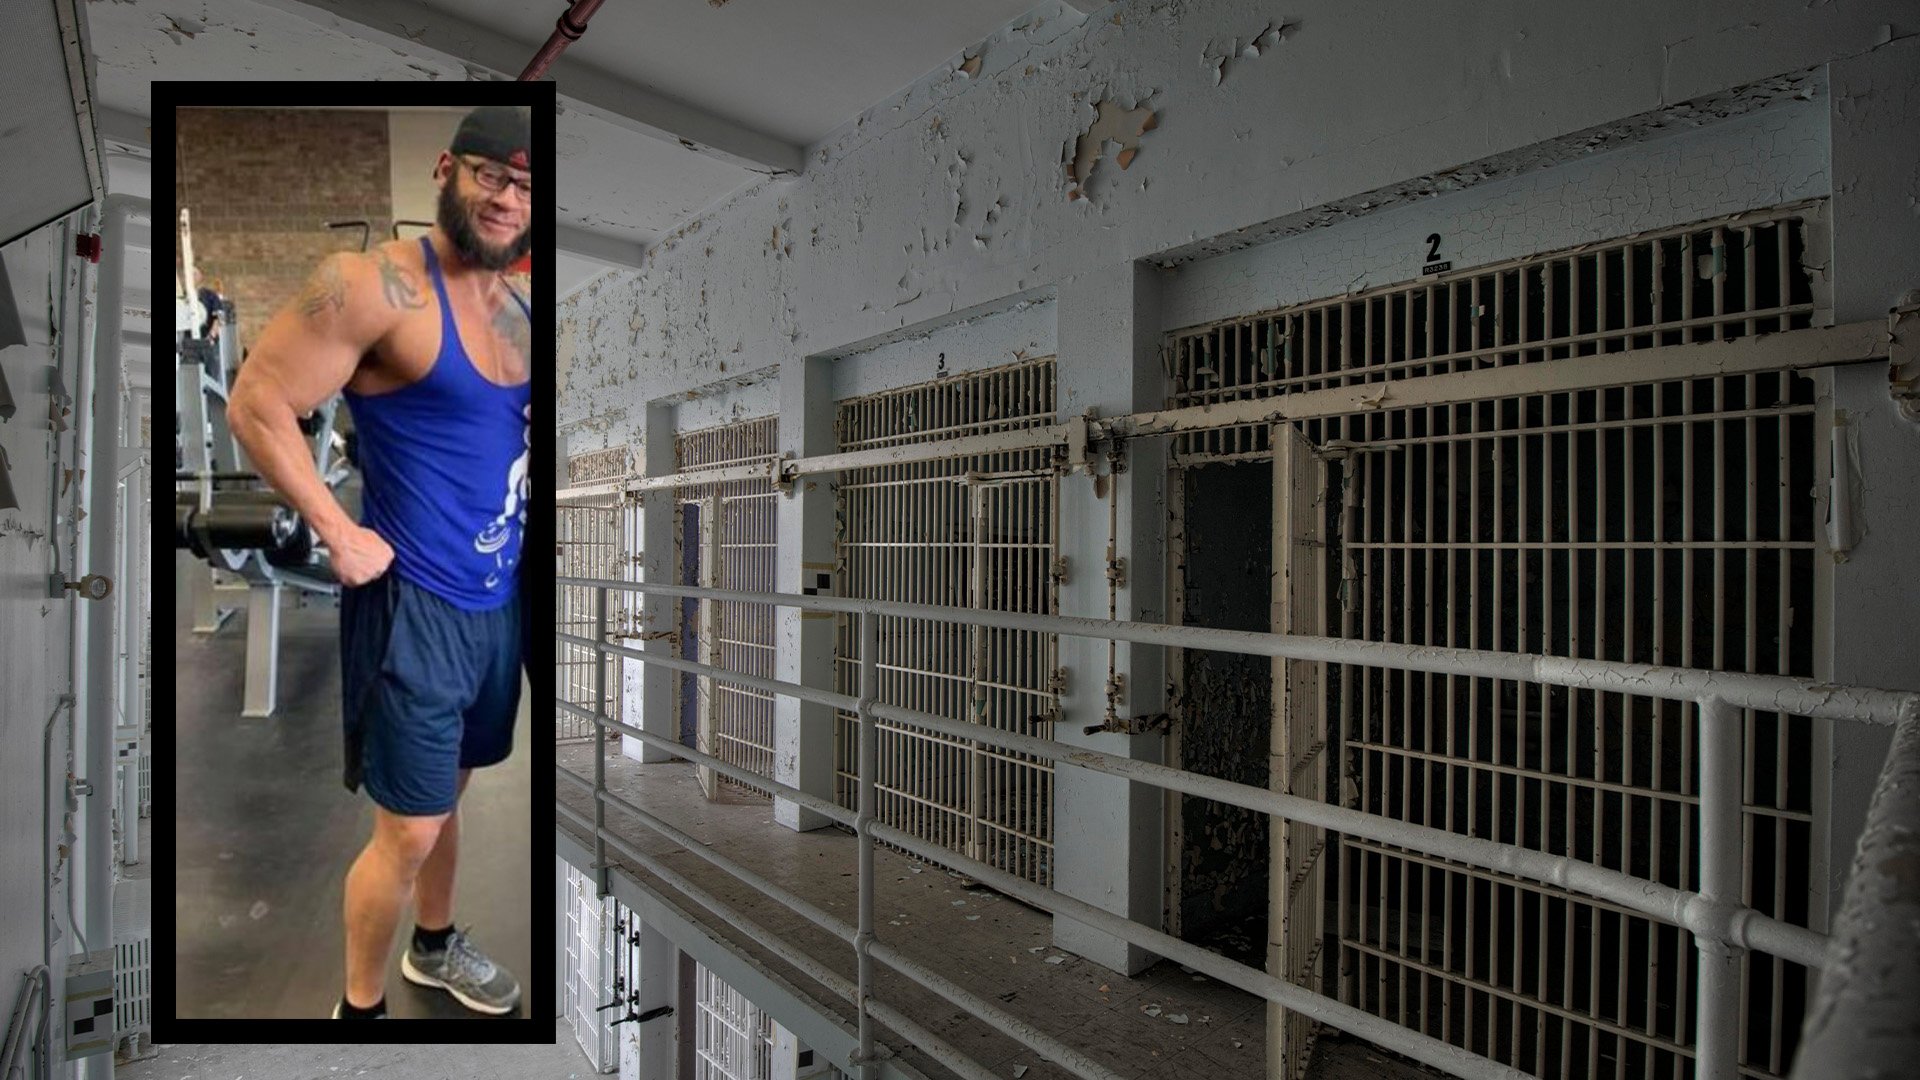 Zachary Ryan Barton, 35, was sentenced on Aug. 12, 2022, to a year behind bars and three years of supervised release when he exits a federal penitentiary. He pleaded guilty to defrauding the US Department of Veterans Affairs by faking or exaggerating injuries. Coffee or Die Magazine composite.